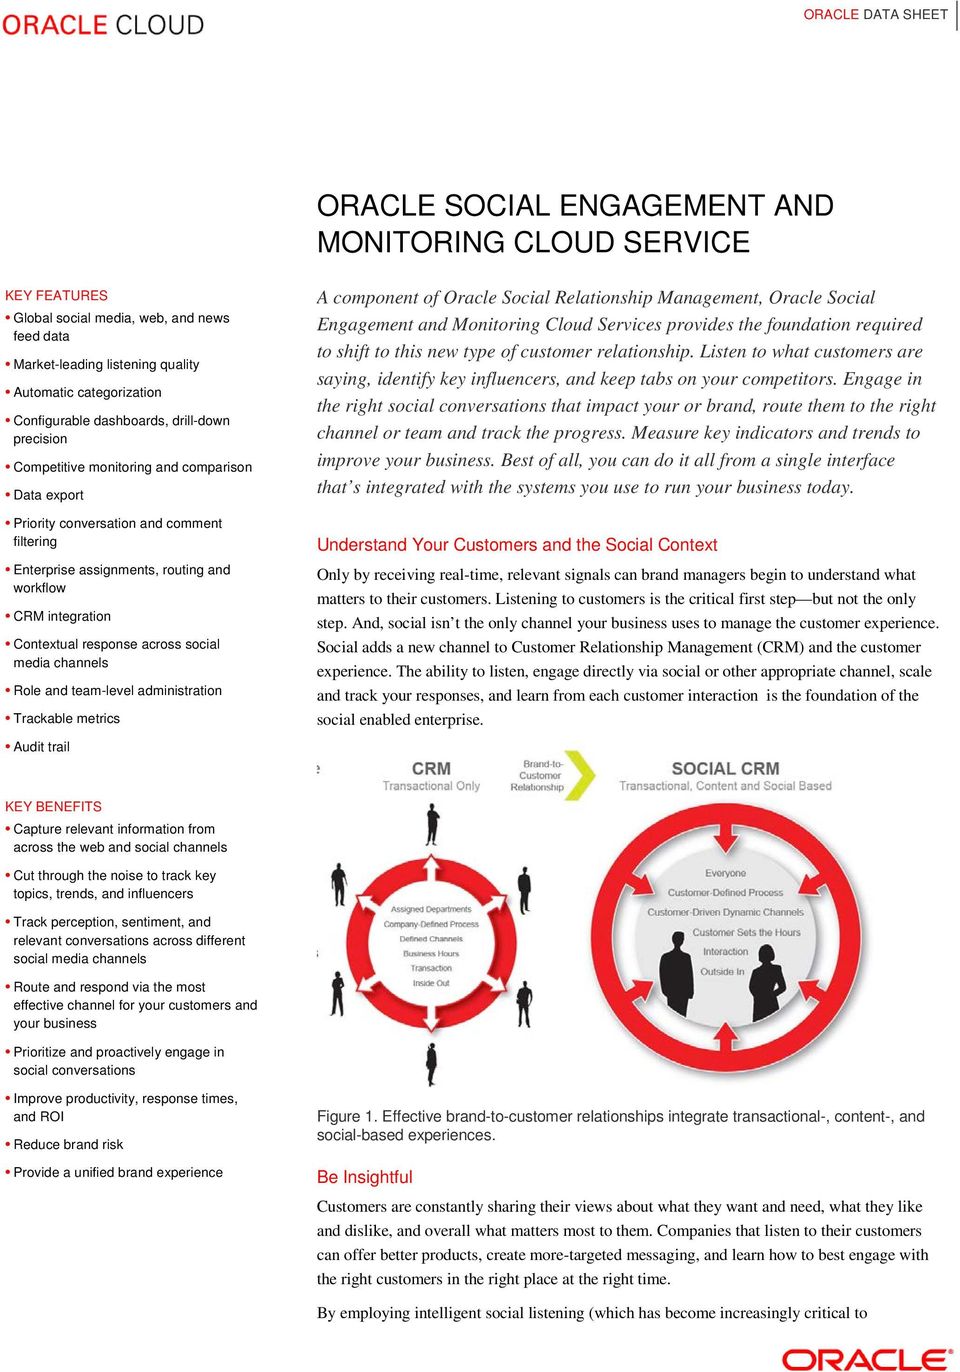 across social media channels Role and team-level administration Trackable metrics A component of Oracle Social Relationship Management, Oracle Social Engagement and Monitoring Cloud Services provides